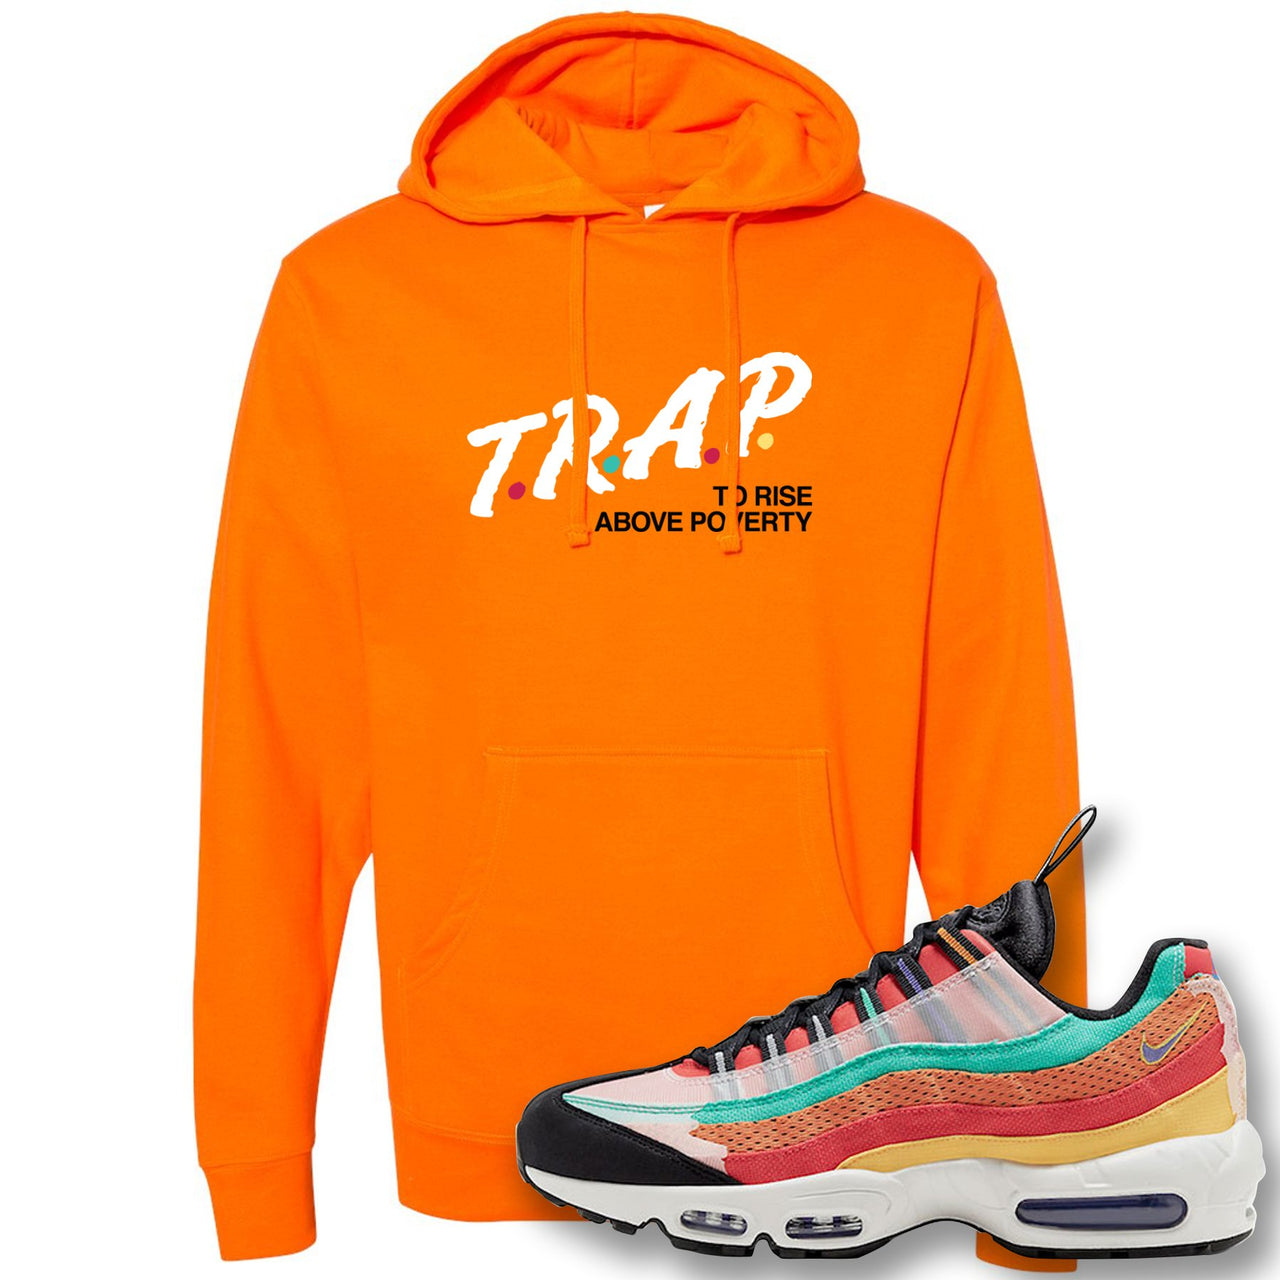 Air Max 95 Black History Month Sneaker Safety Orange Pullover Hoodie | Hoodie to match Nike Air Max 95 Black History Month Shoes | Trap To Rise Above Poverty